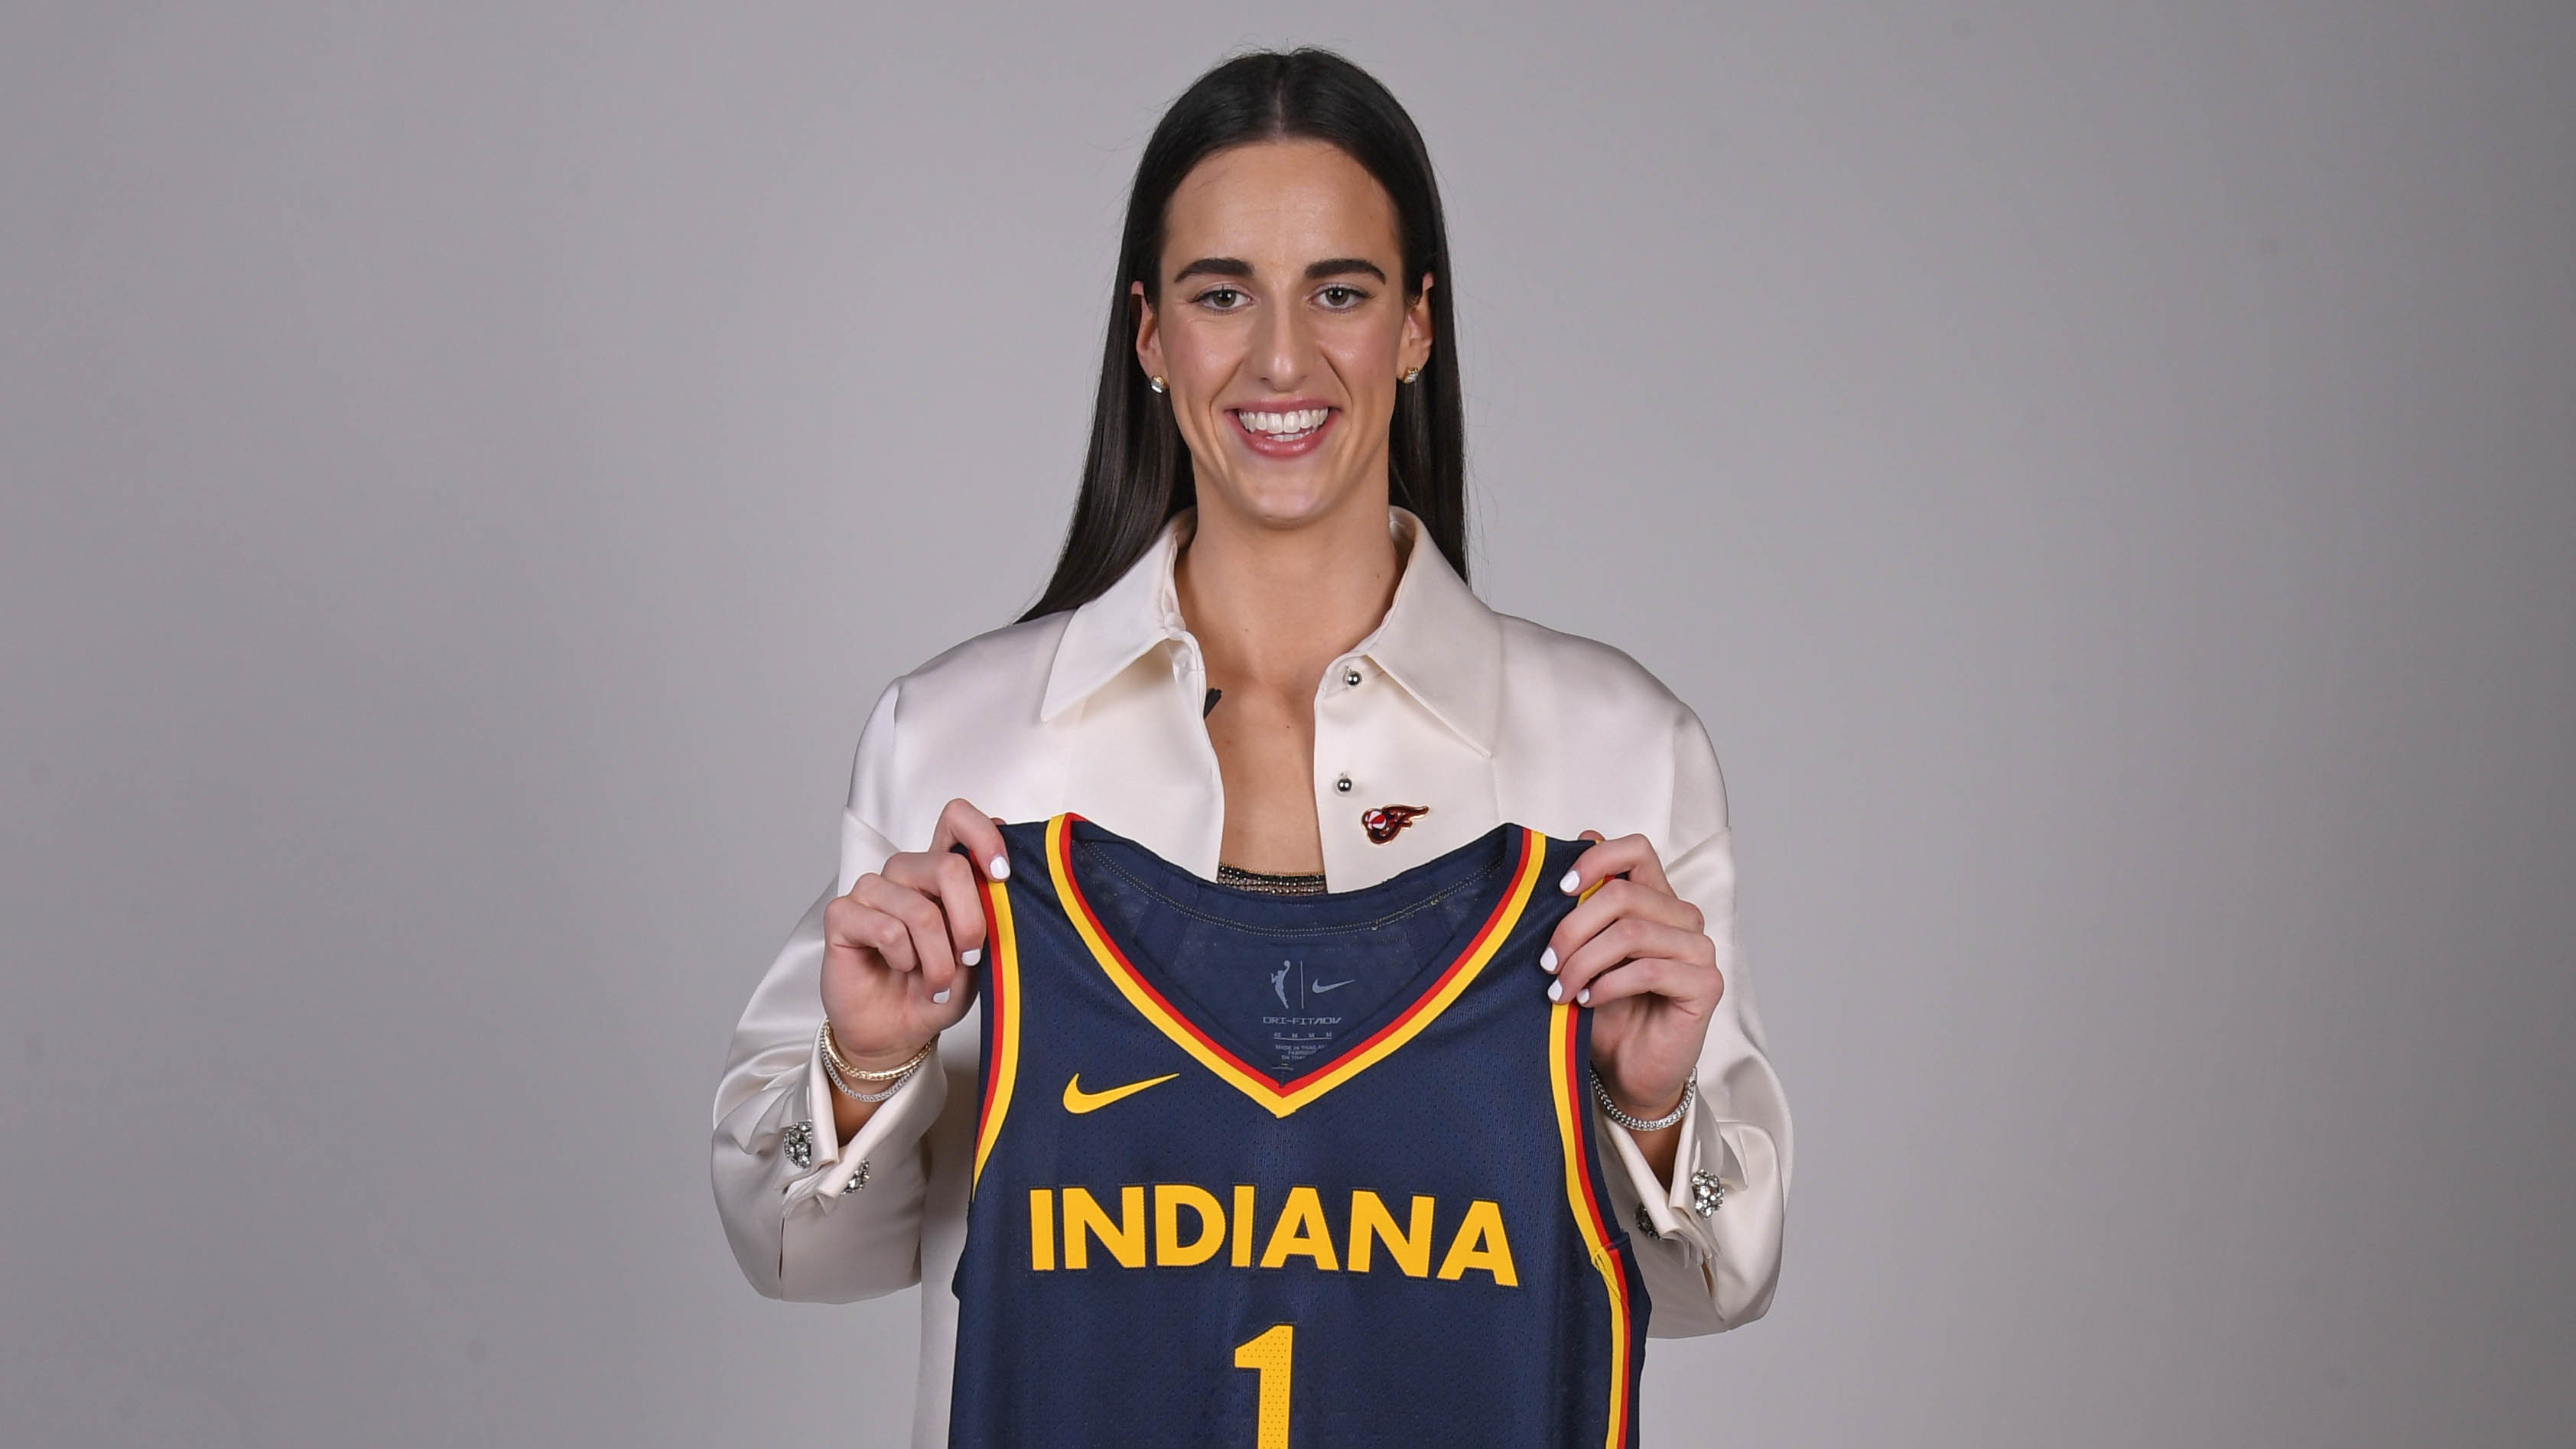 Caitlin Clark went No. 1 in the WNBA draft. Some fans are outraged at
her salary